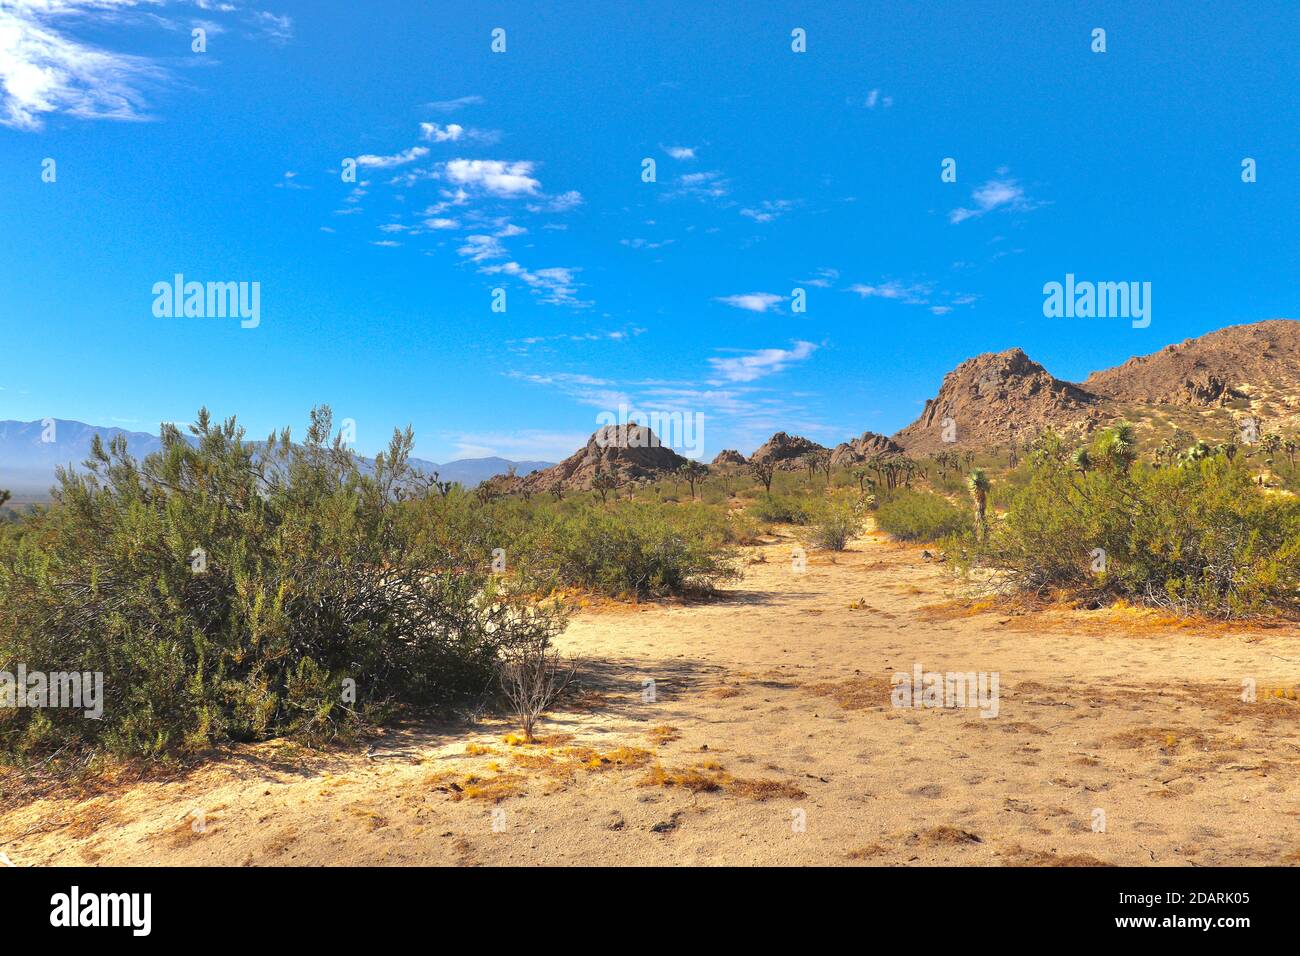 Desert Landscape in the Southern California City Lake Los Angeles with Mountains and boulders Stock Photo